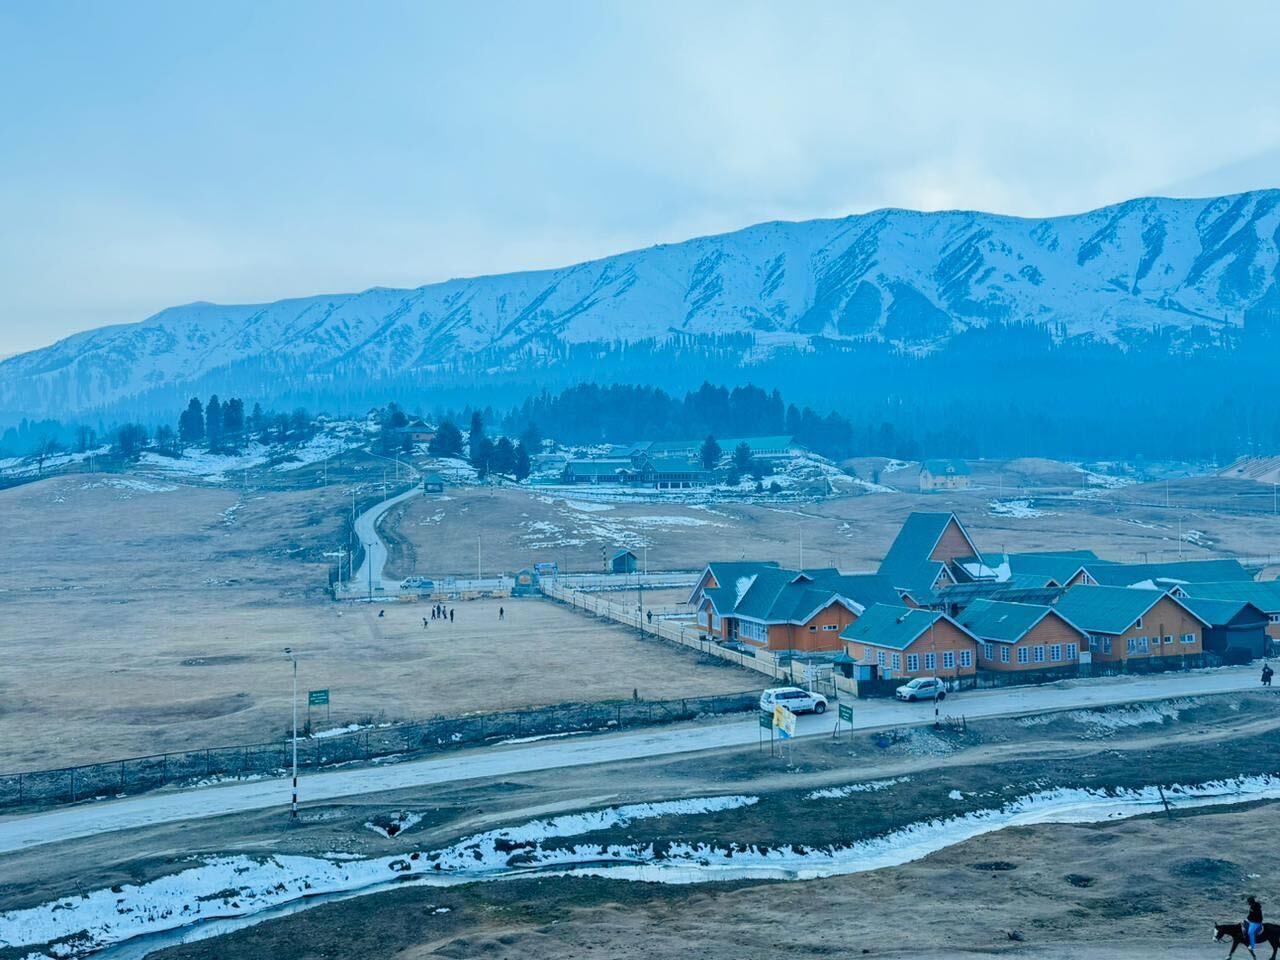 This ski resort in Gulmarg, Kashmir, has little to no snow on the ground this month